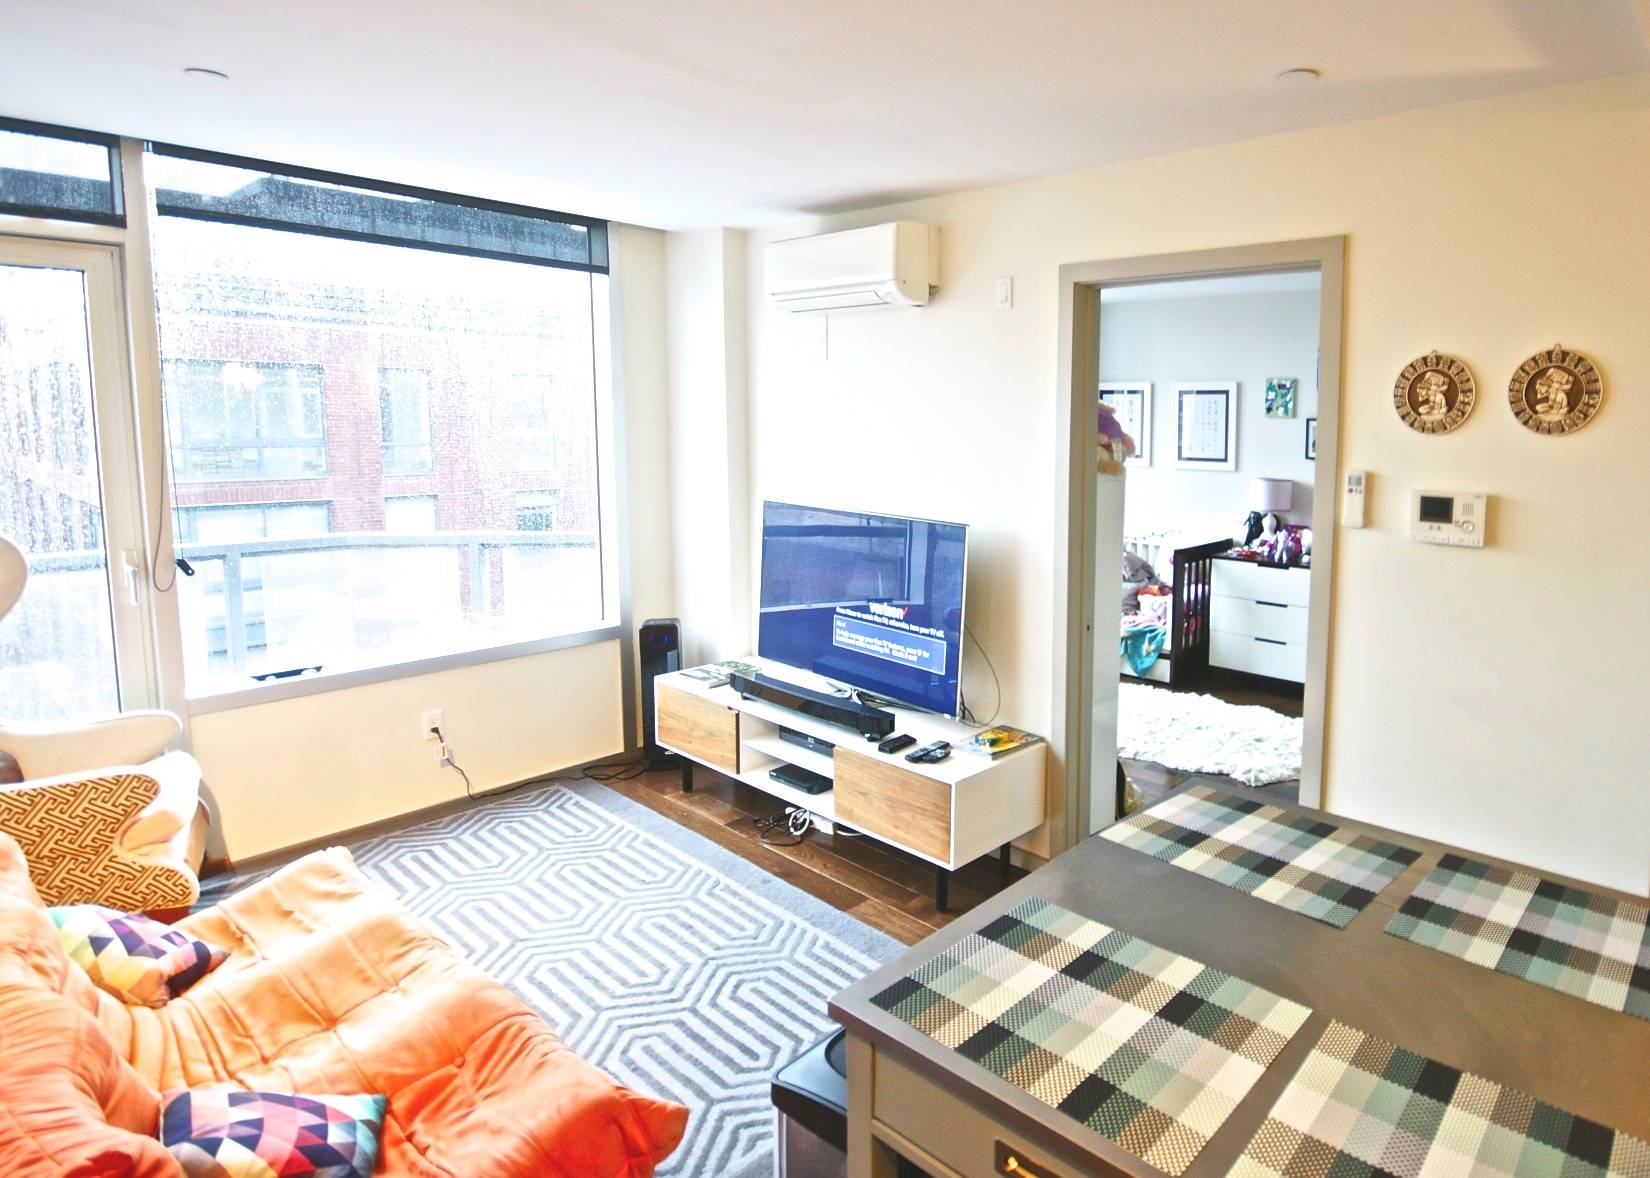 Prime Williamsburg 2 Bedroom/2 Bathroom + Home Office  w/ Private Balcony w/Pool, Parking and Gym 